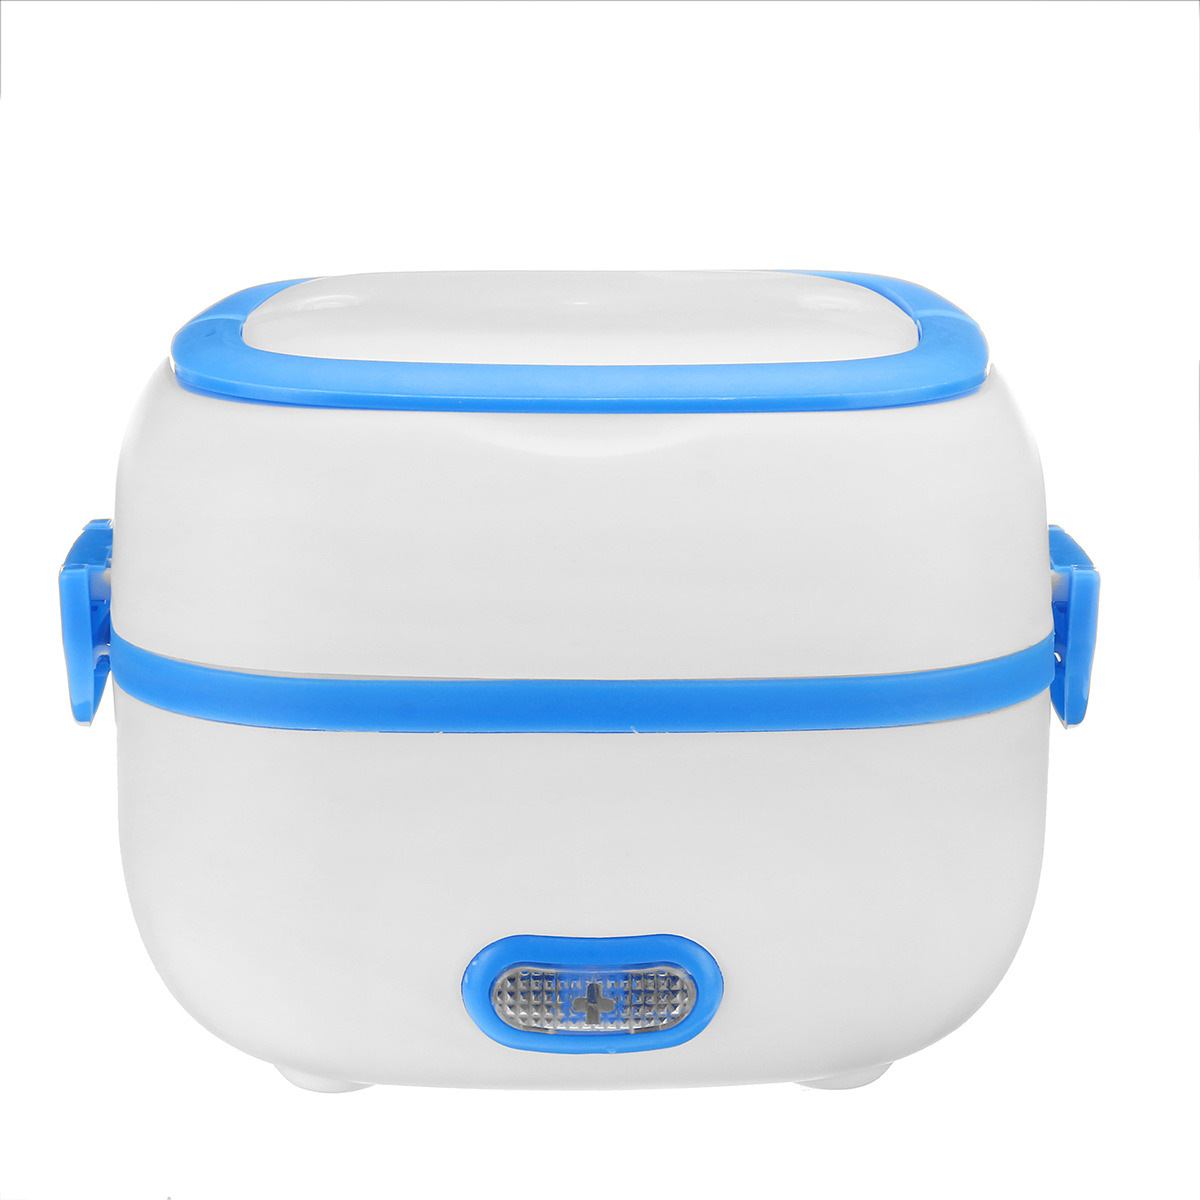 YIMANJIA-XB-2018A-Electric-Heated-Lunch-Box-220V-Portable-2-in-1-Car--Home-US-PlugEU-Plug-1779134-1